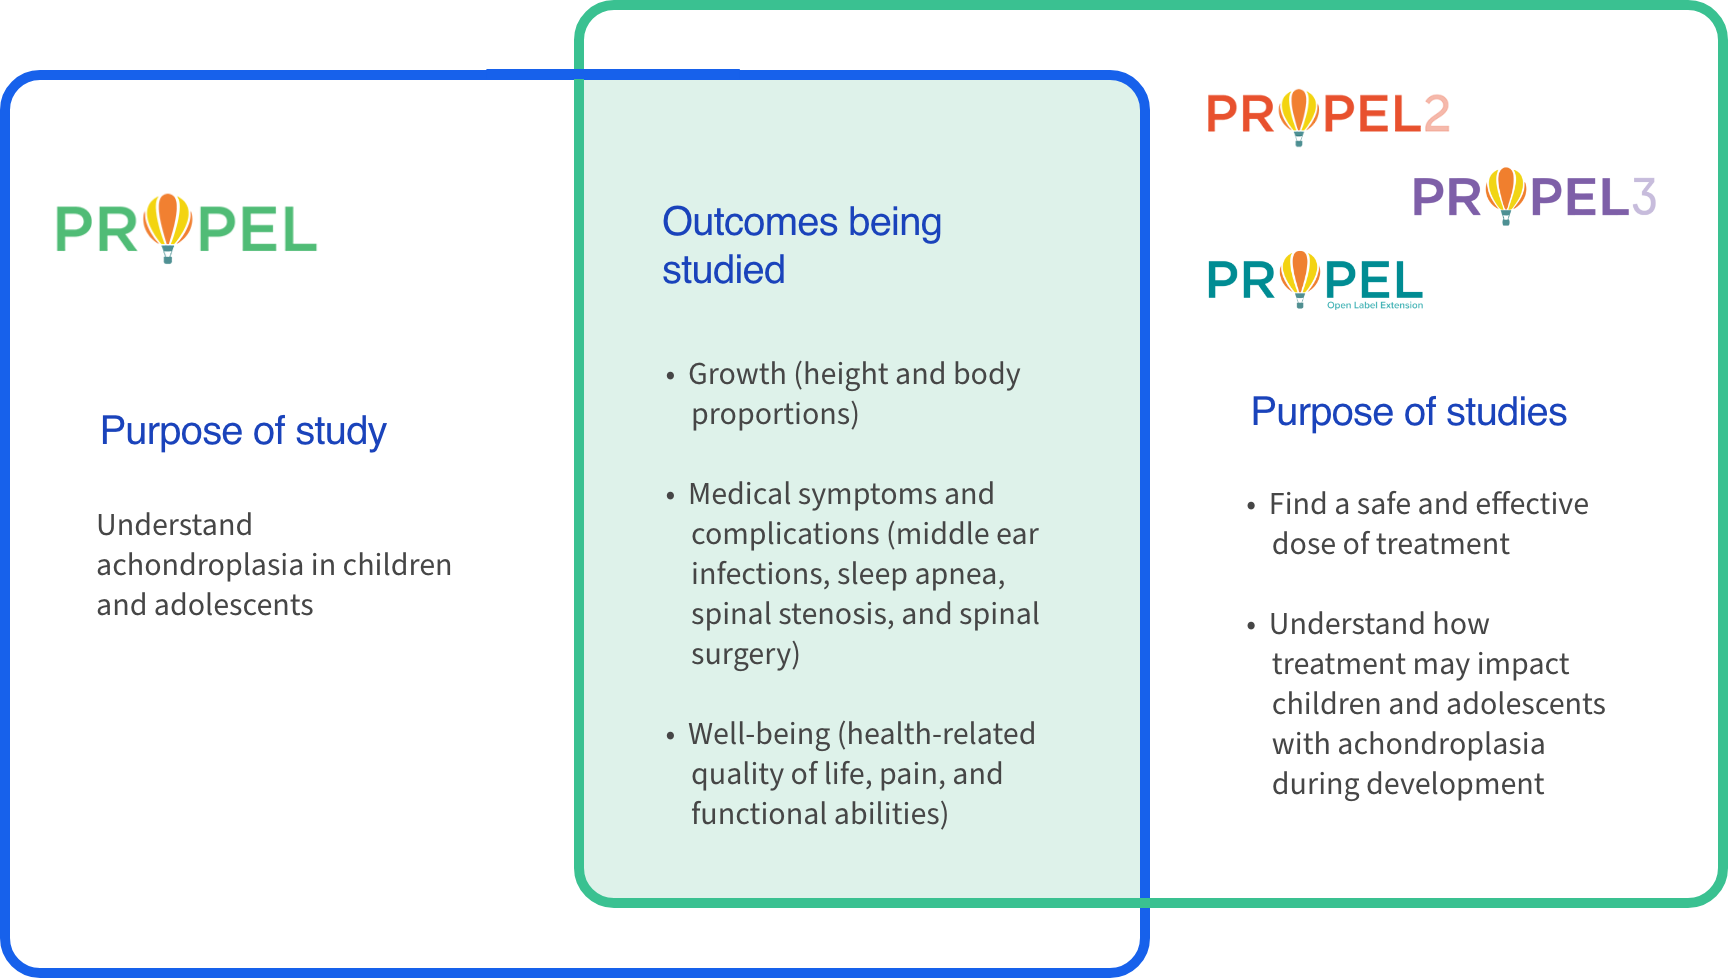 Infographic presenting Propel clinical studies. The left side states that the purpose of the study is to understand achondroplasia in children and adolescents. The middle section lists the outcomes being studied, such as growth (height and body proportions), medical symptoms and complications (middle ear infections, sleep apnea, spinal stenosis, and spinal surgery), and well-being (health-related quality of life, pain, and functional abilities). The right side highlights the purpose of studies: to find a safe and effective dose of treatment and understand how treatment may impact children and adolescents with achondroplasia during development.